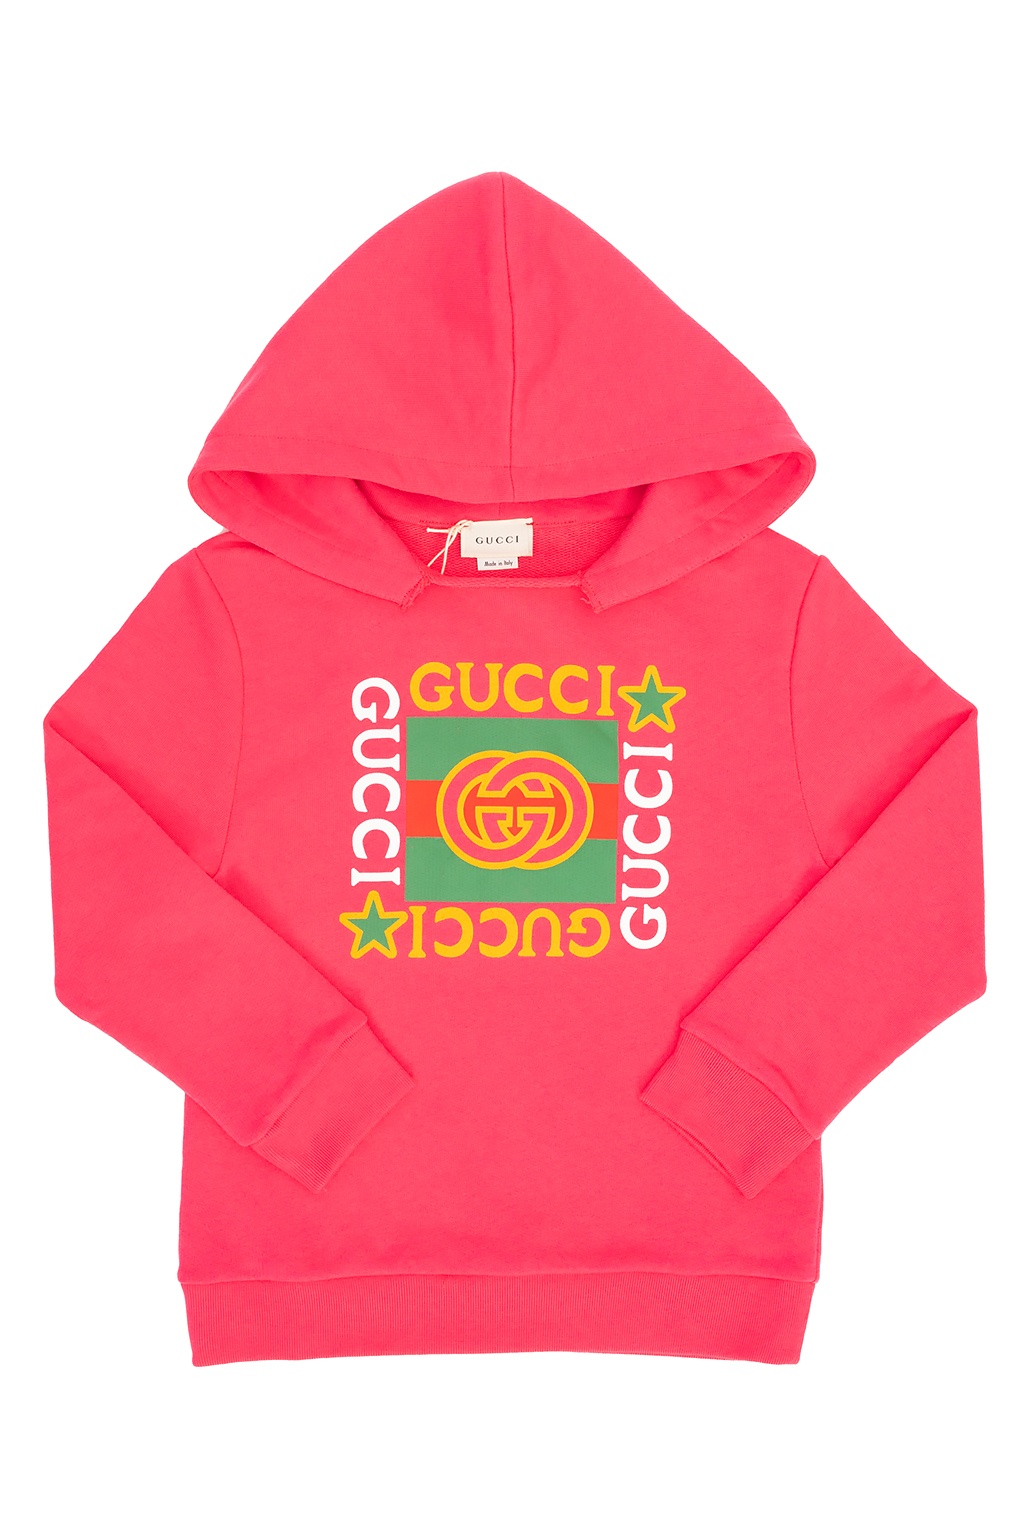 gucci hoodie for boys